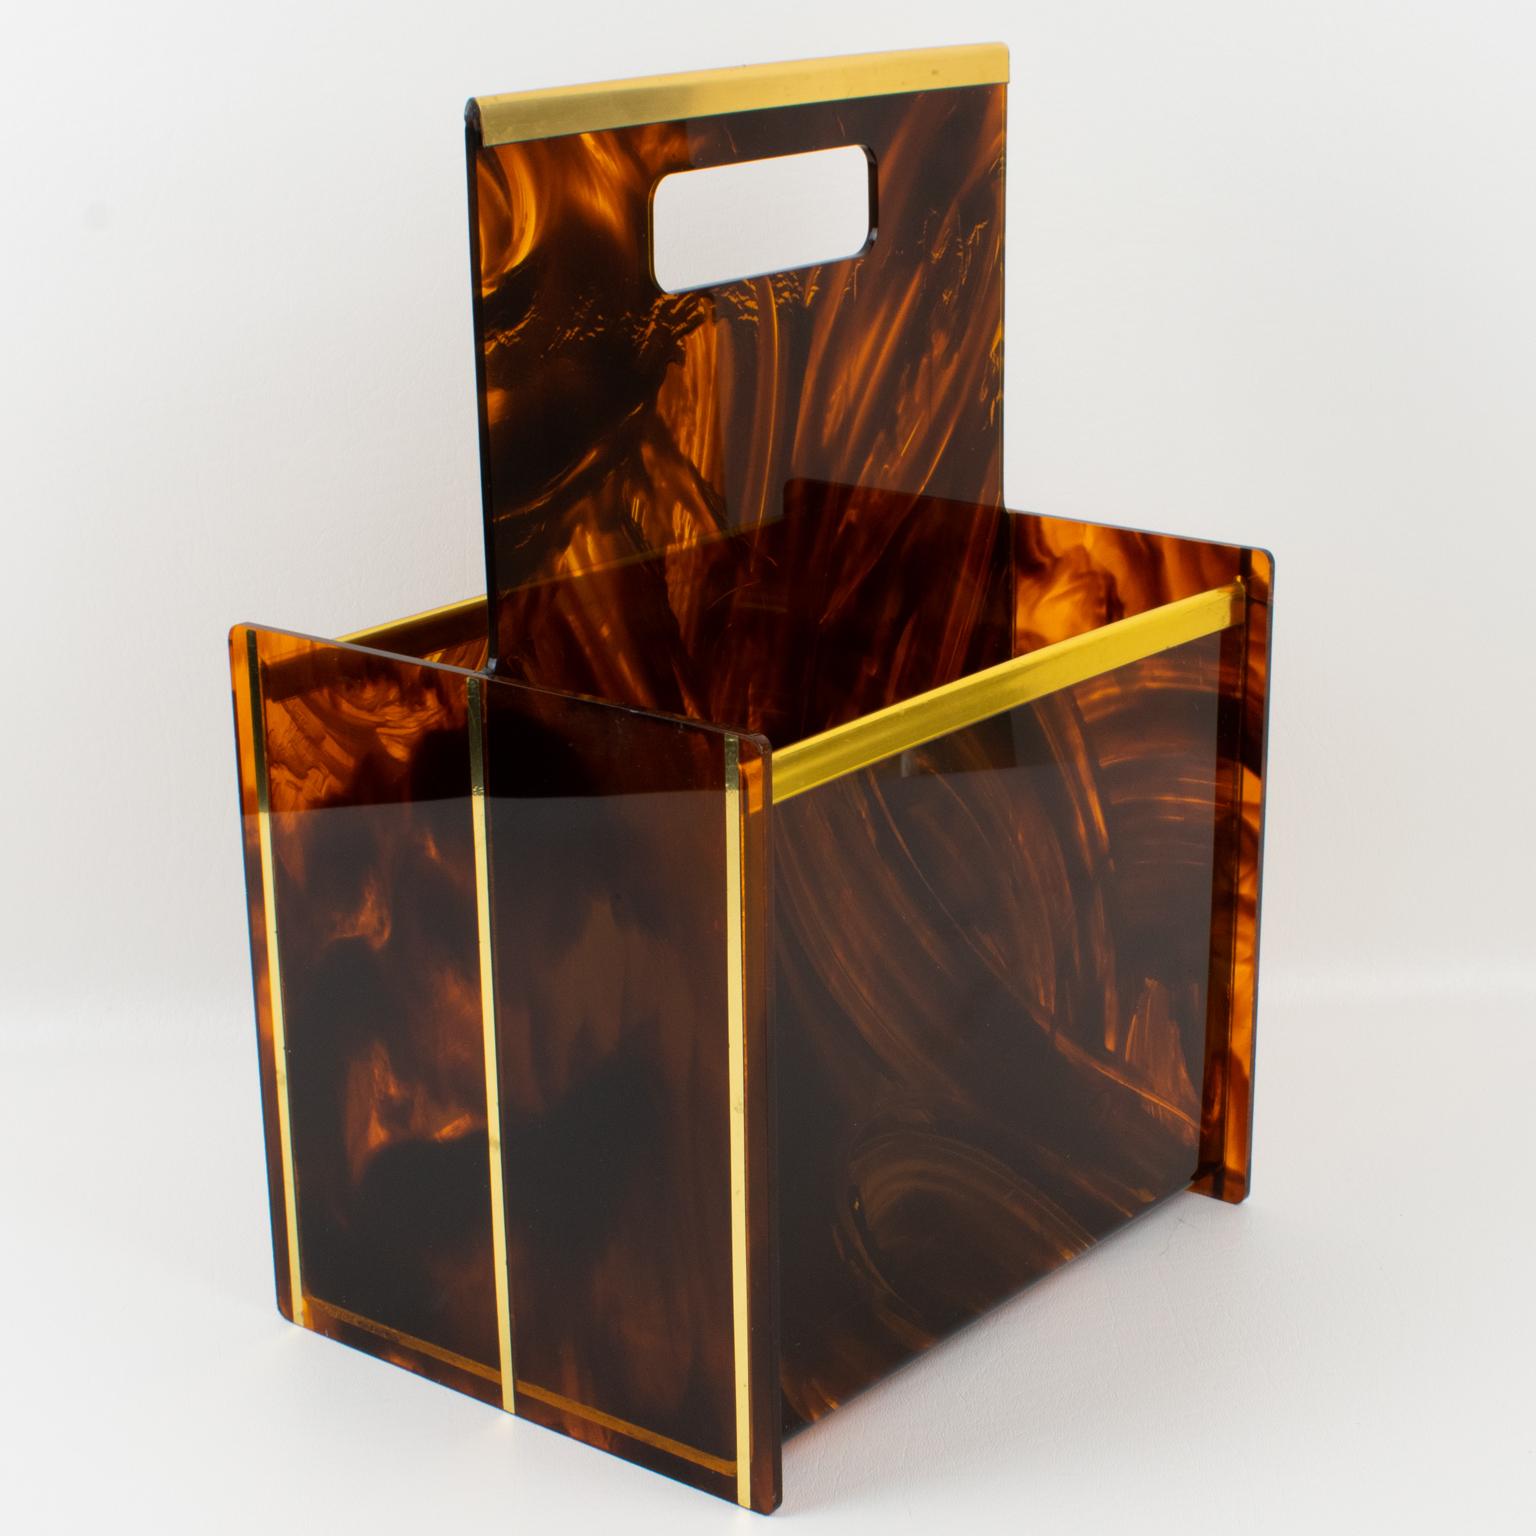 Stylish 1970s magazine rack, holder, or stand designed for the Christian Dior Home Collection in the 1970s. Geometric shape with polished brass trim gallery and accents and faux tortoiseshell (tortoise) textured pattern Lucite. Great accessory for